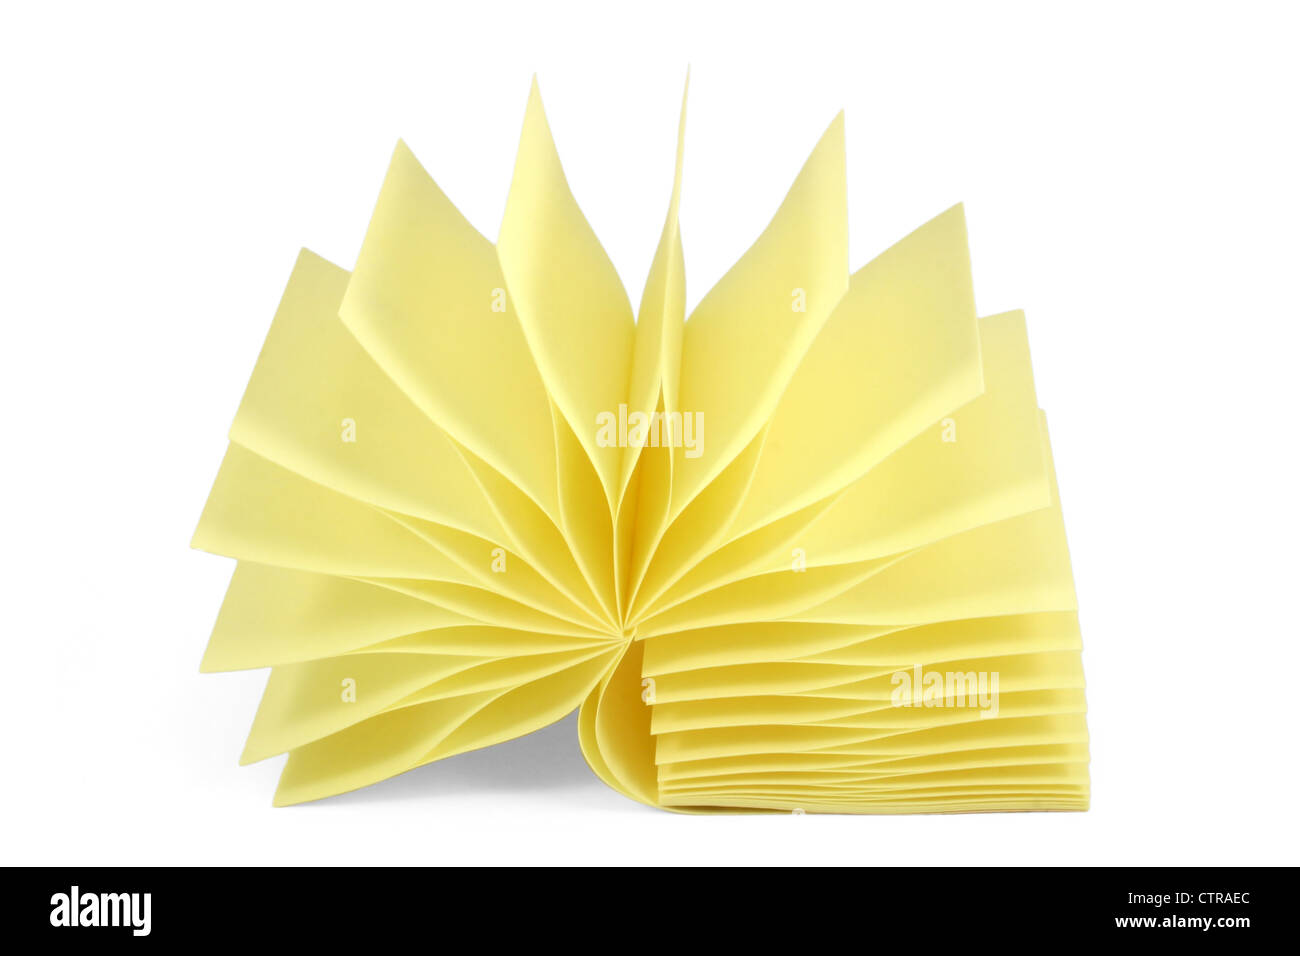 A sticky pad fanned out against a white background Stock Photo